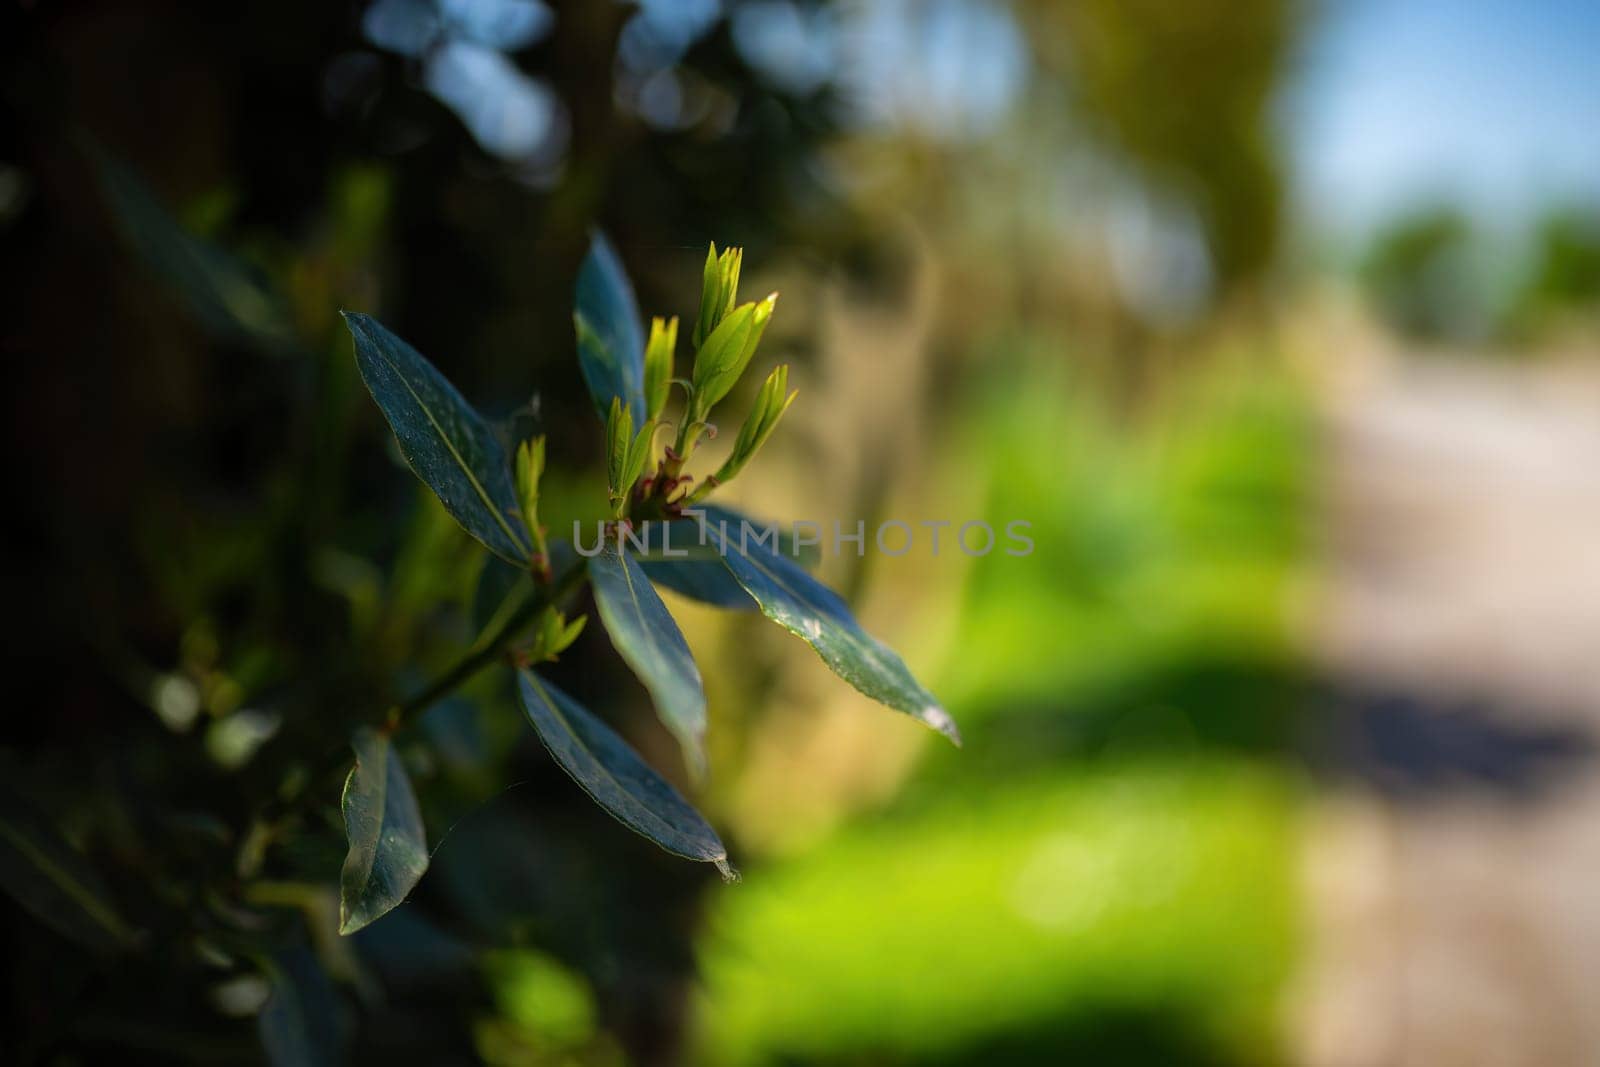 Blurry Photo of a Leafy Tree by pippocarlot